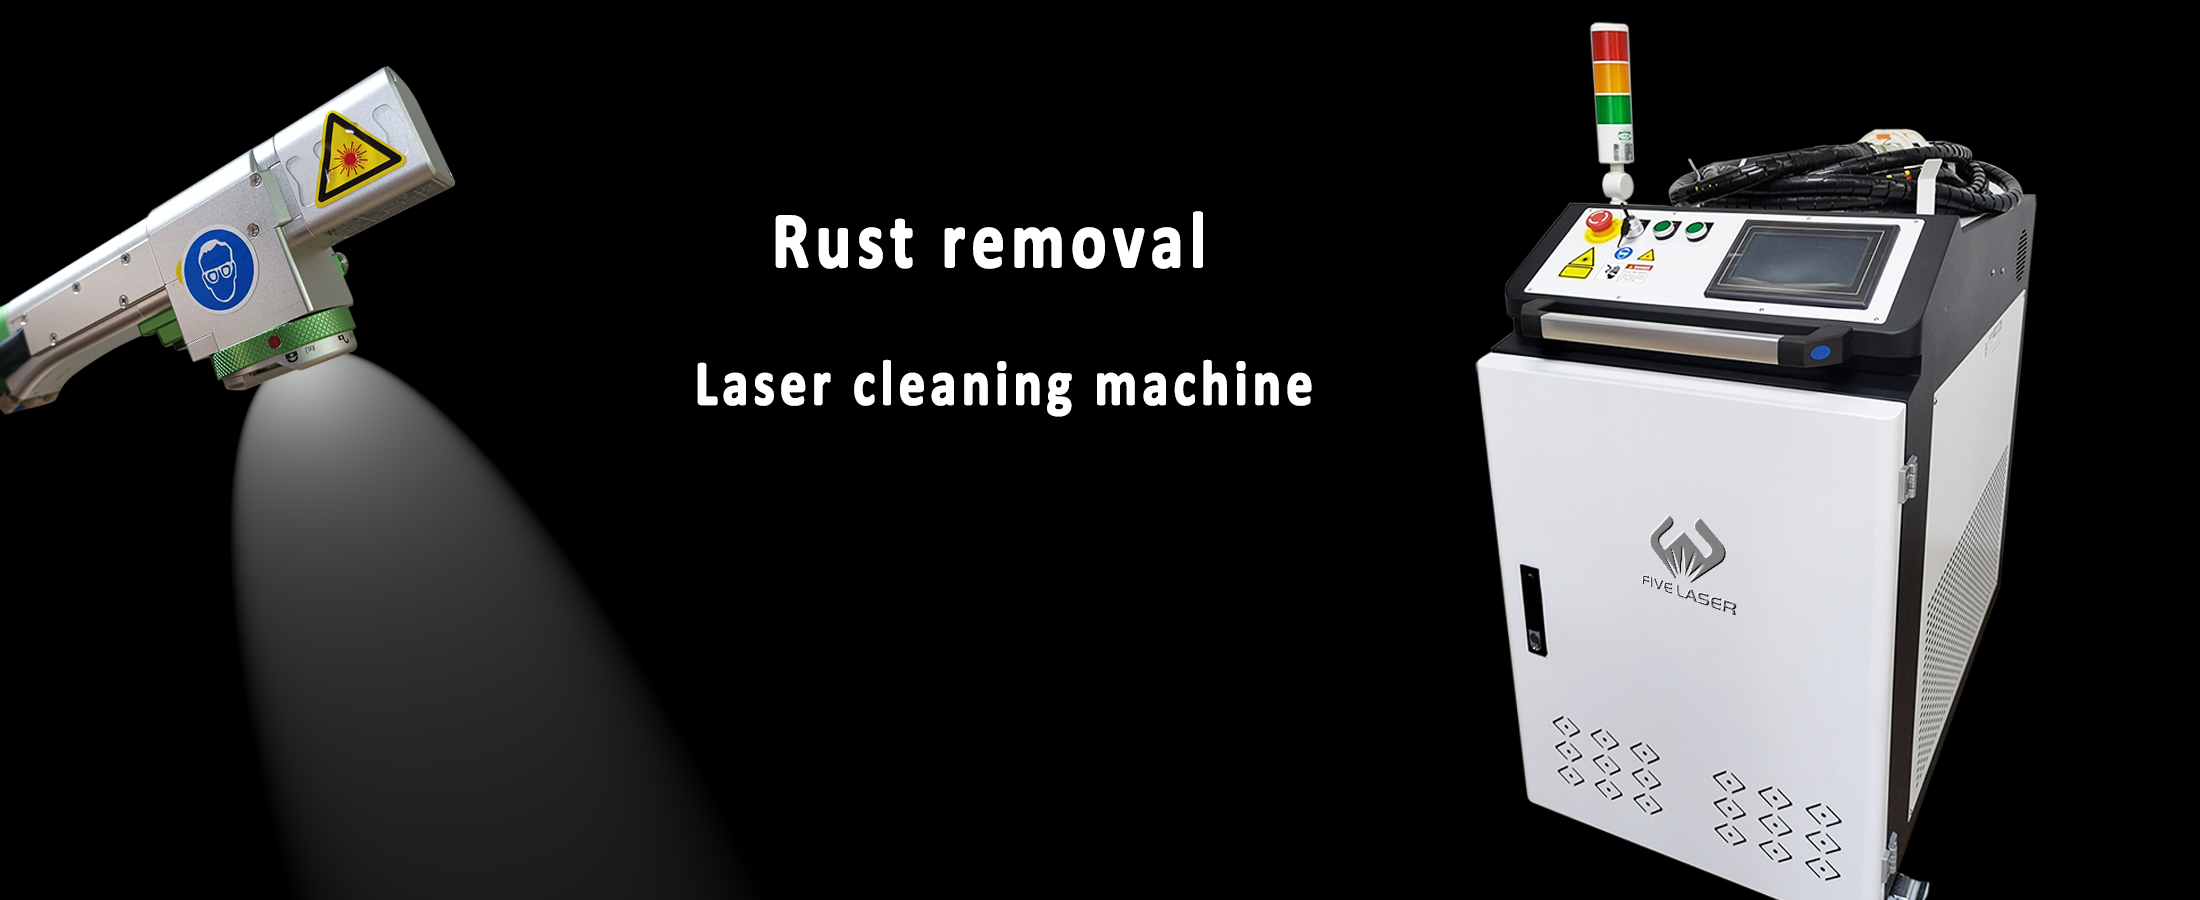 CW-laser-cleaning-machine